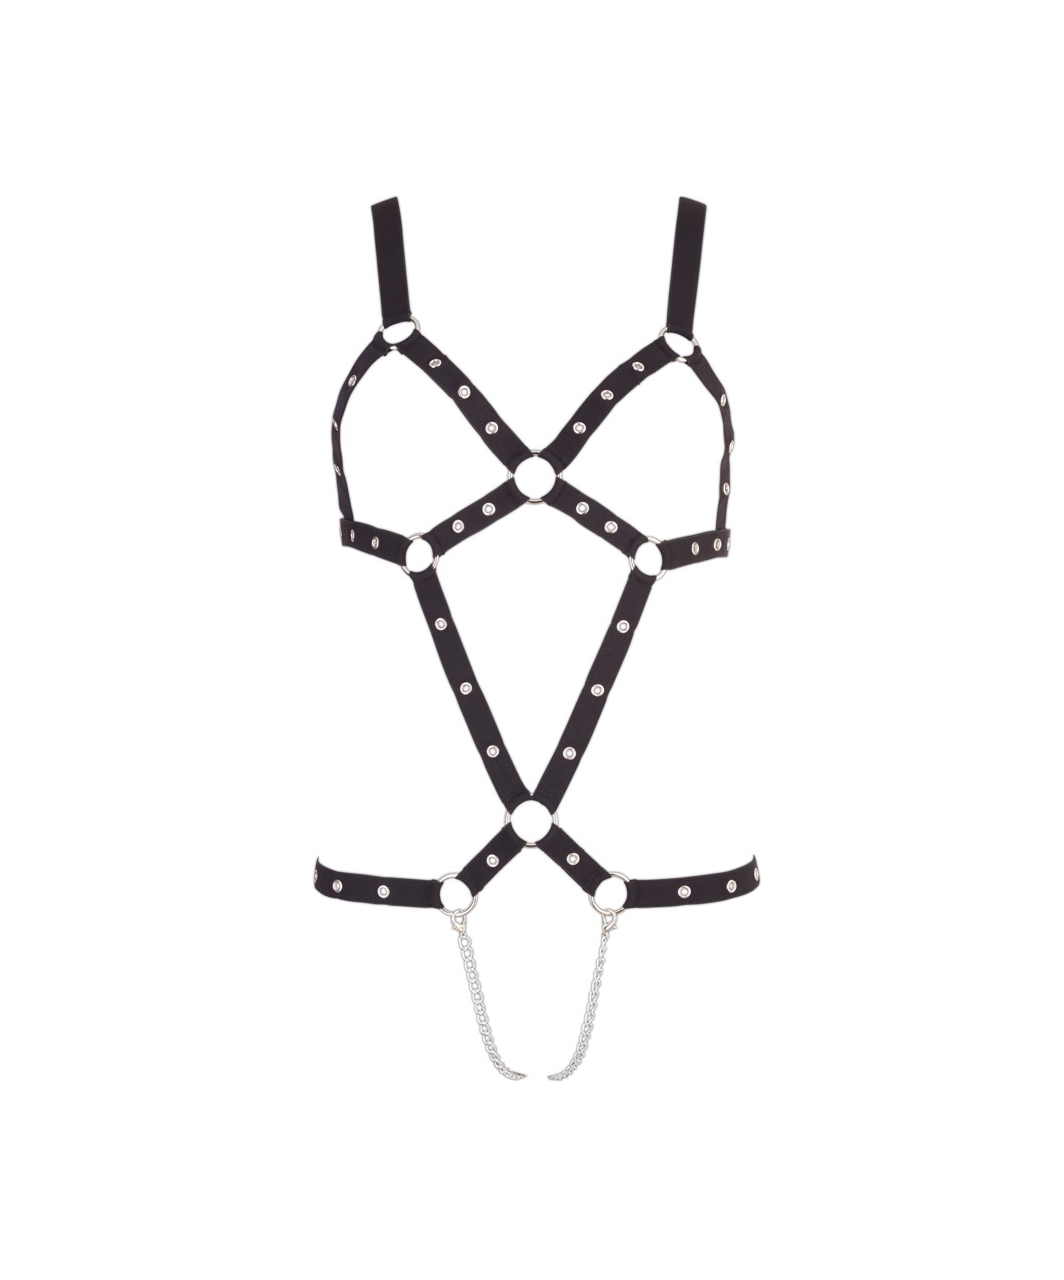 Bad Kitty black strap body with metal chains